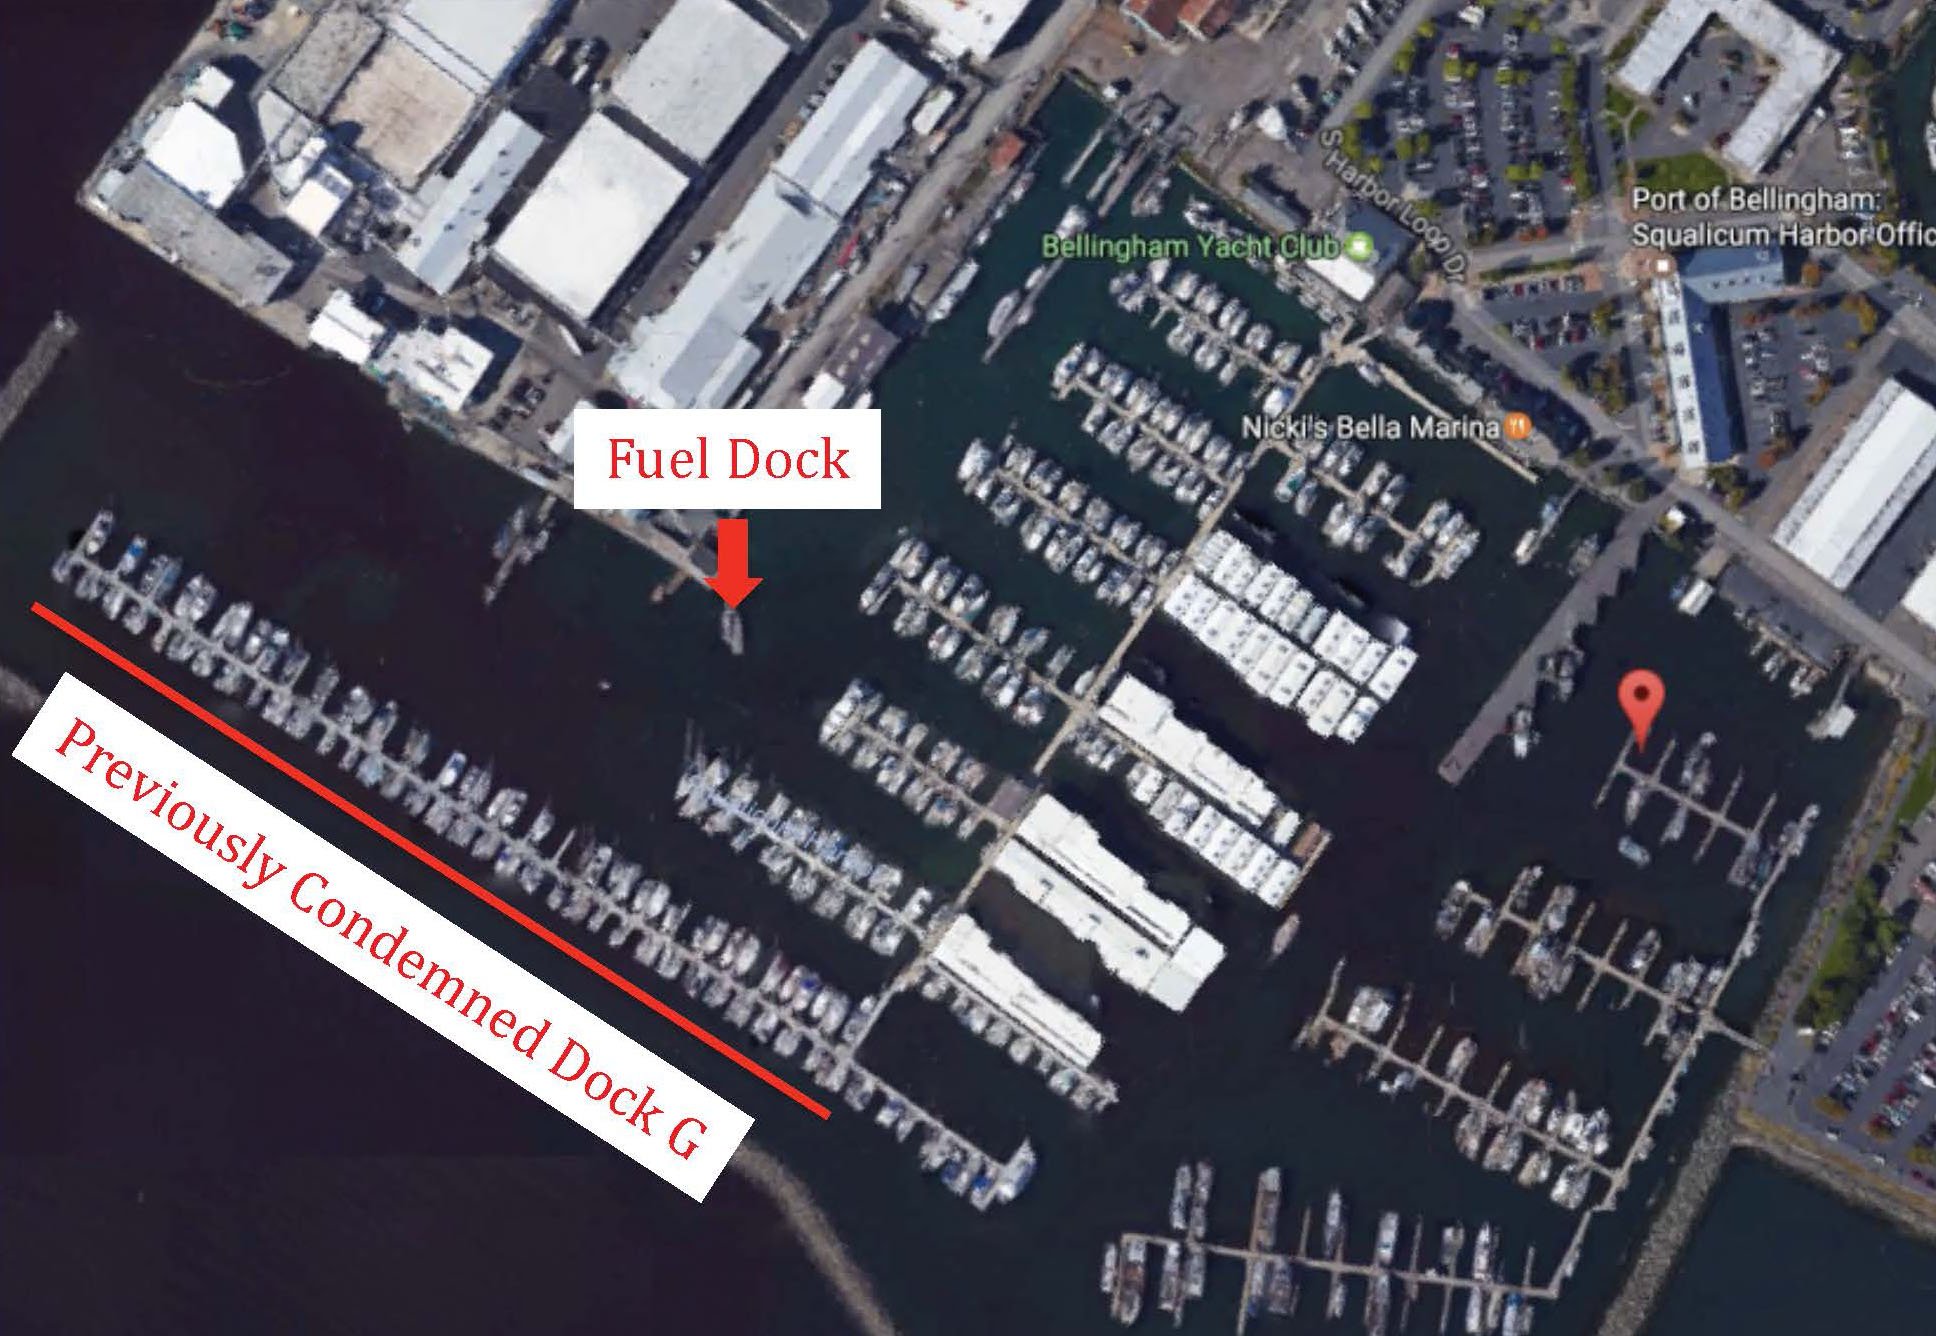 A mapof the harbor showing numerous docked boats from a bird's eye view. Both the Previously Condemned Dock G, and the Fuel Dock are highlighted in red.